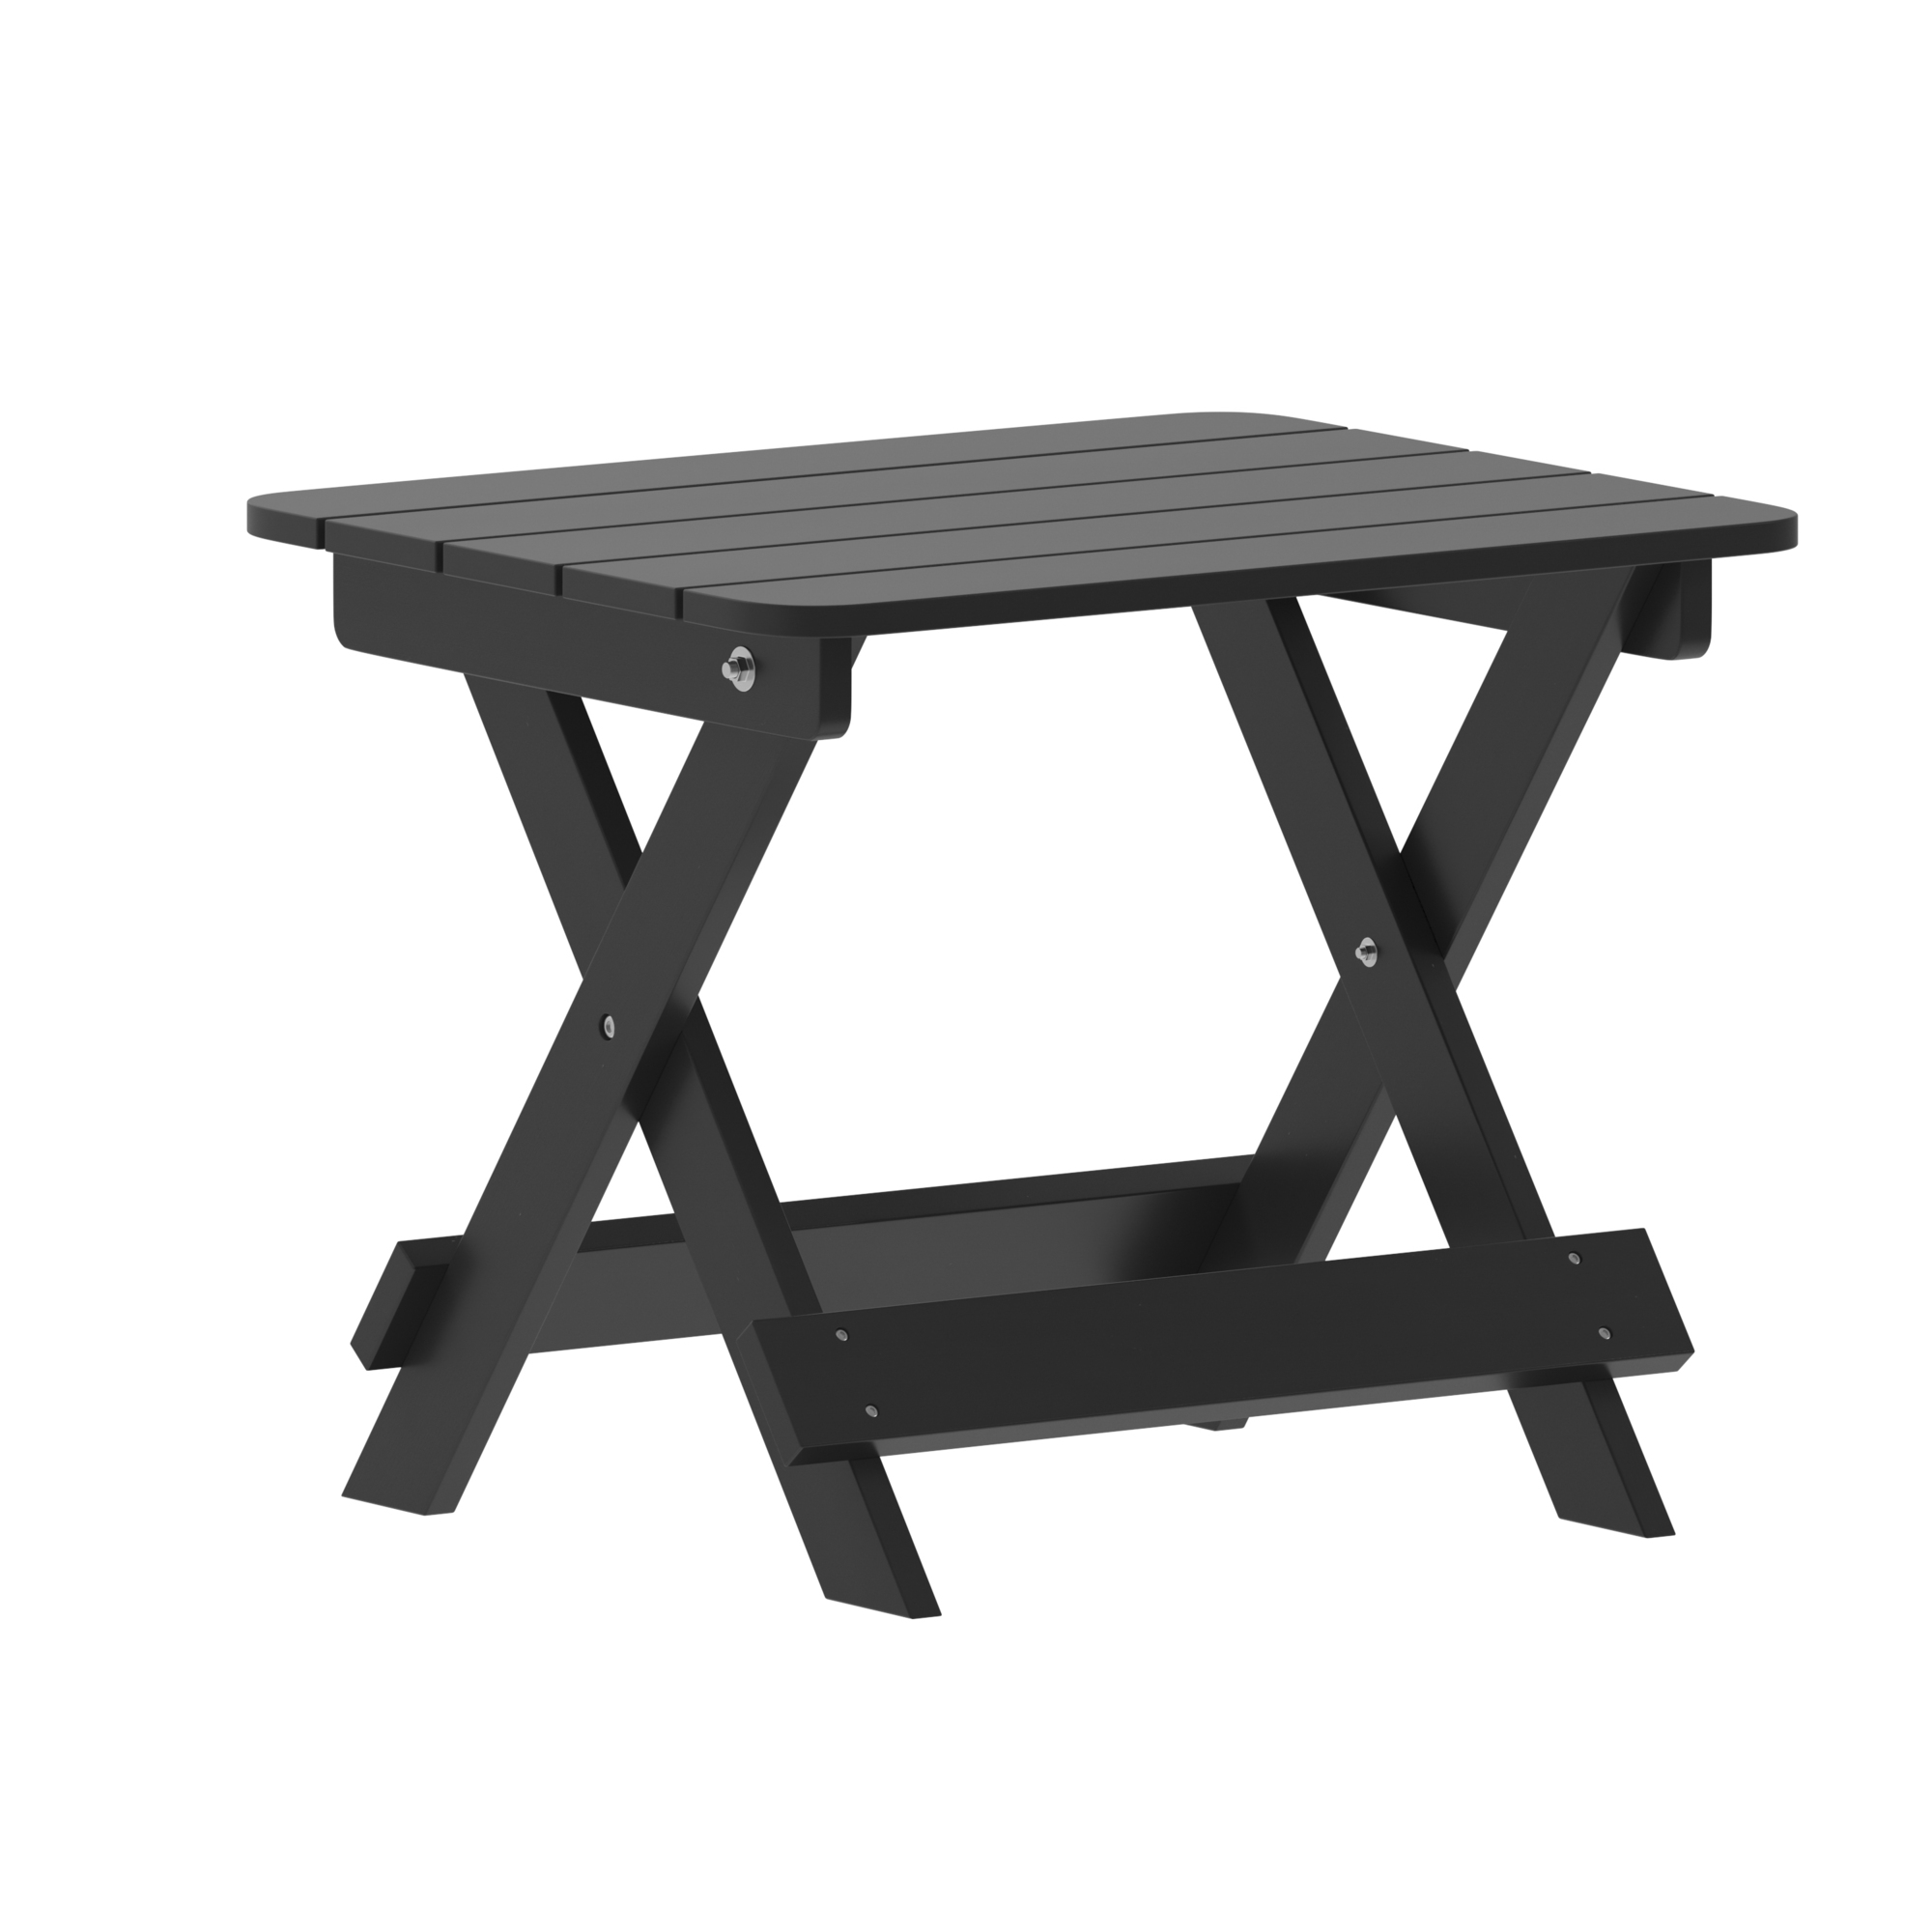 Flash Furniture, Black Portable Folding Adirondack Side Table, Table Shape Rectangle, Primary Color Black, Height 18 in, Model LEHMP2012162HBK